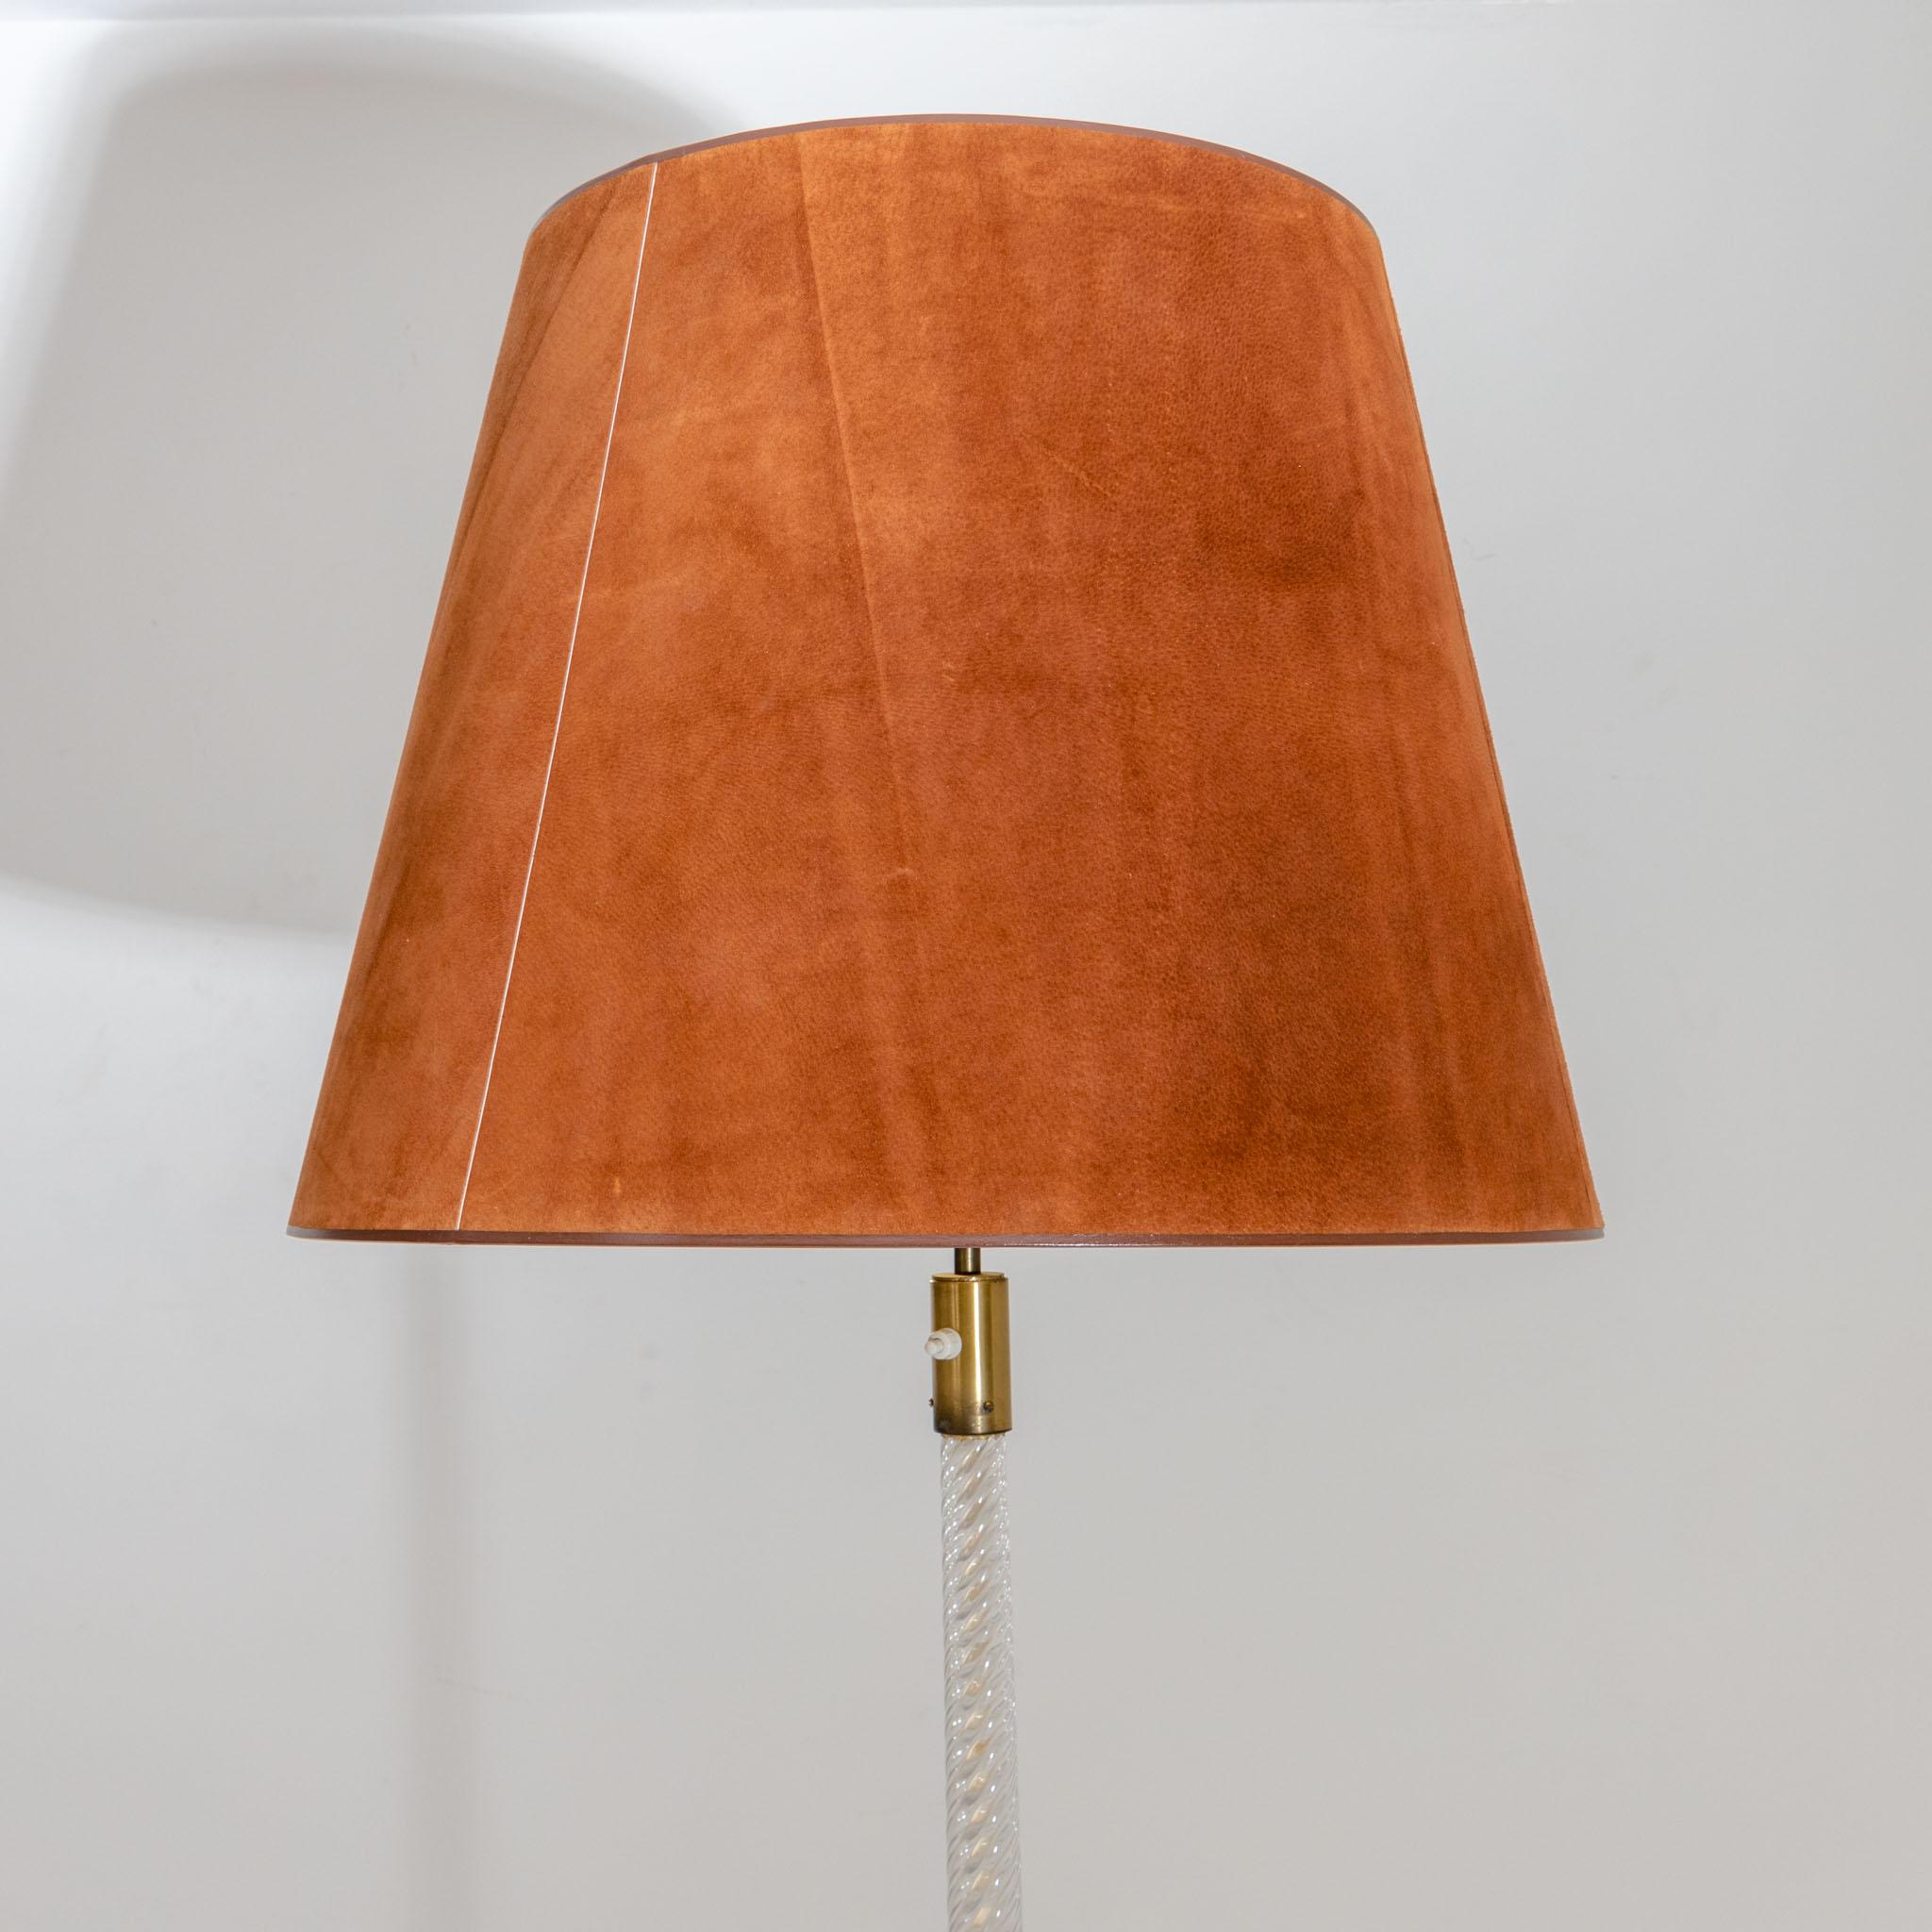 Modern Murano Glass Floor Lamp with Suede Shade by Carlo Scarpa for Venini, Italy 1940s